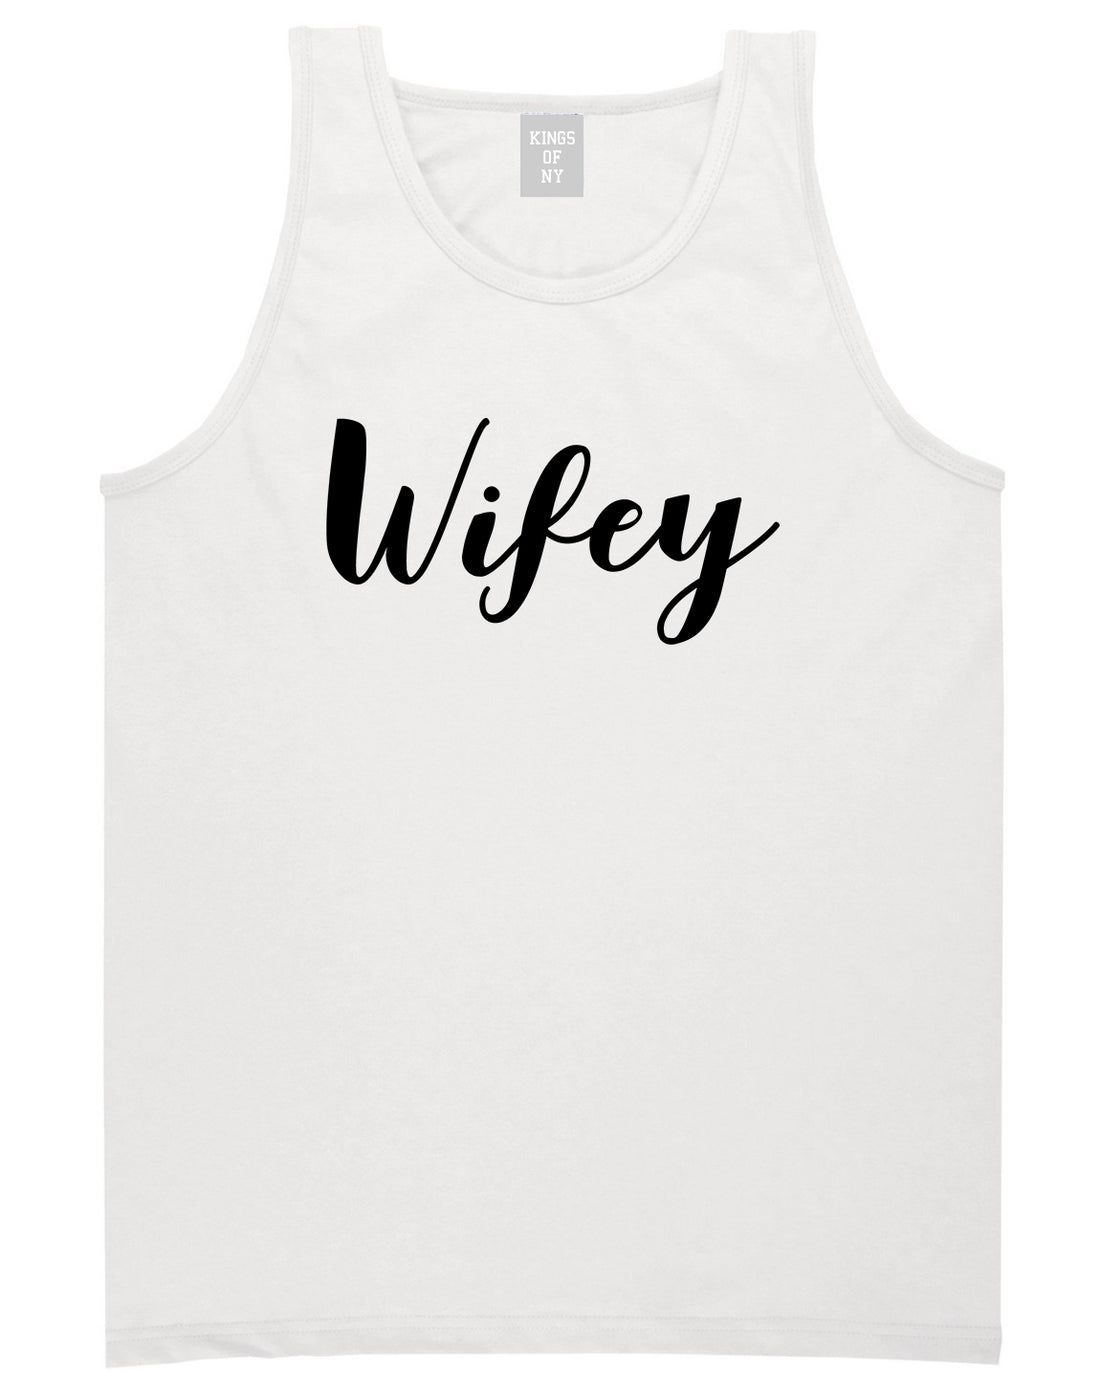 Wifey Script White Tank Top Shirt by Kings Of NY